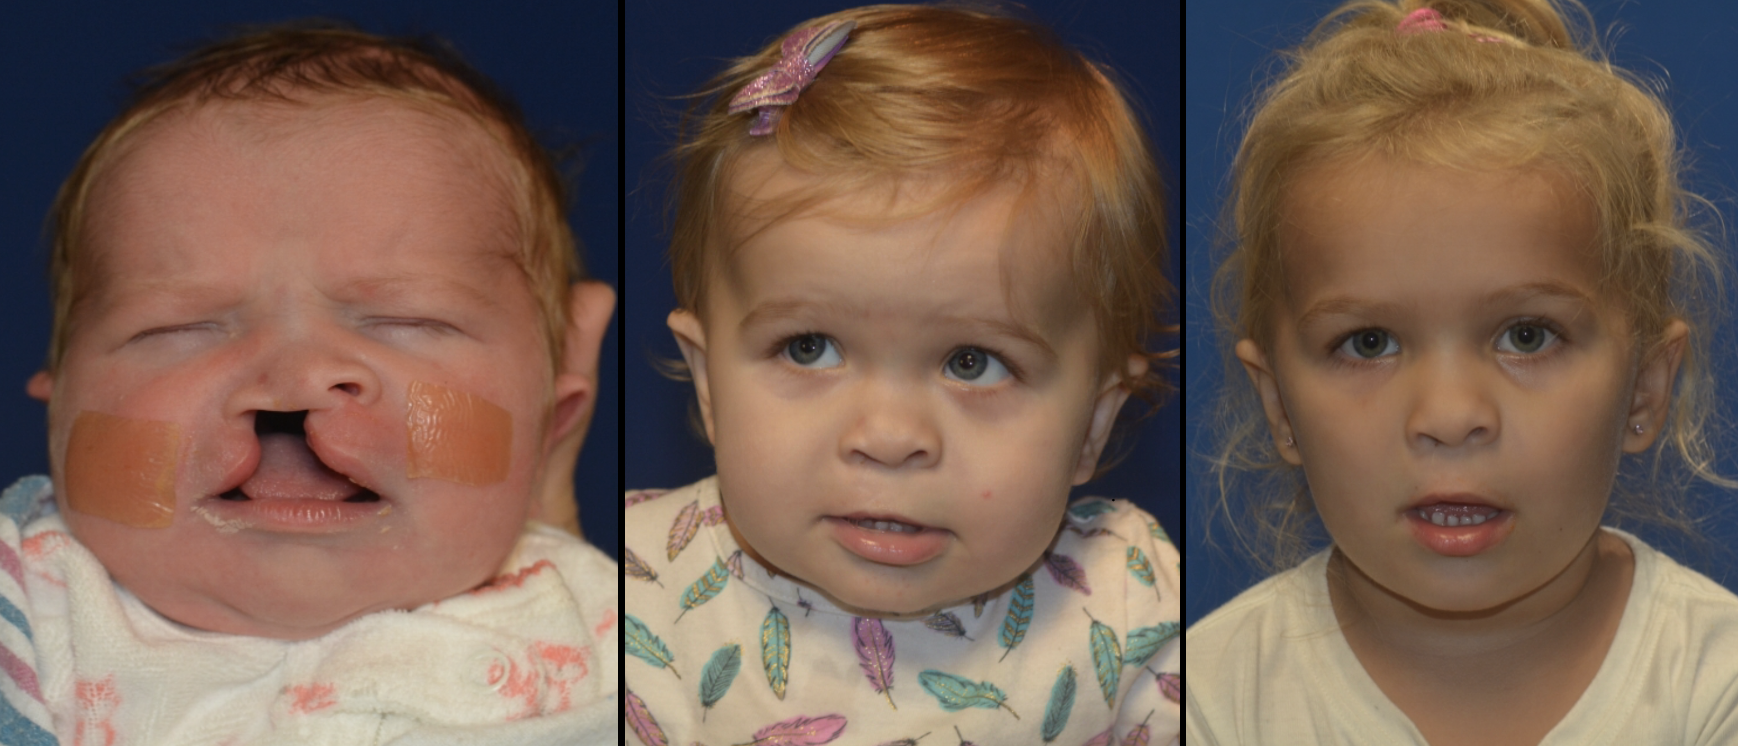 A patient of Dr. Hammoudeh who underwent ECLR at 2 weeks of age, pictured in the middle is 11 months after surgery, and pictured right is 3.5 years after surgery.